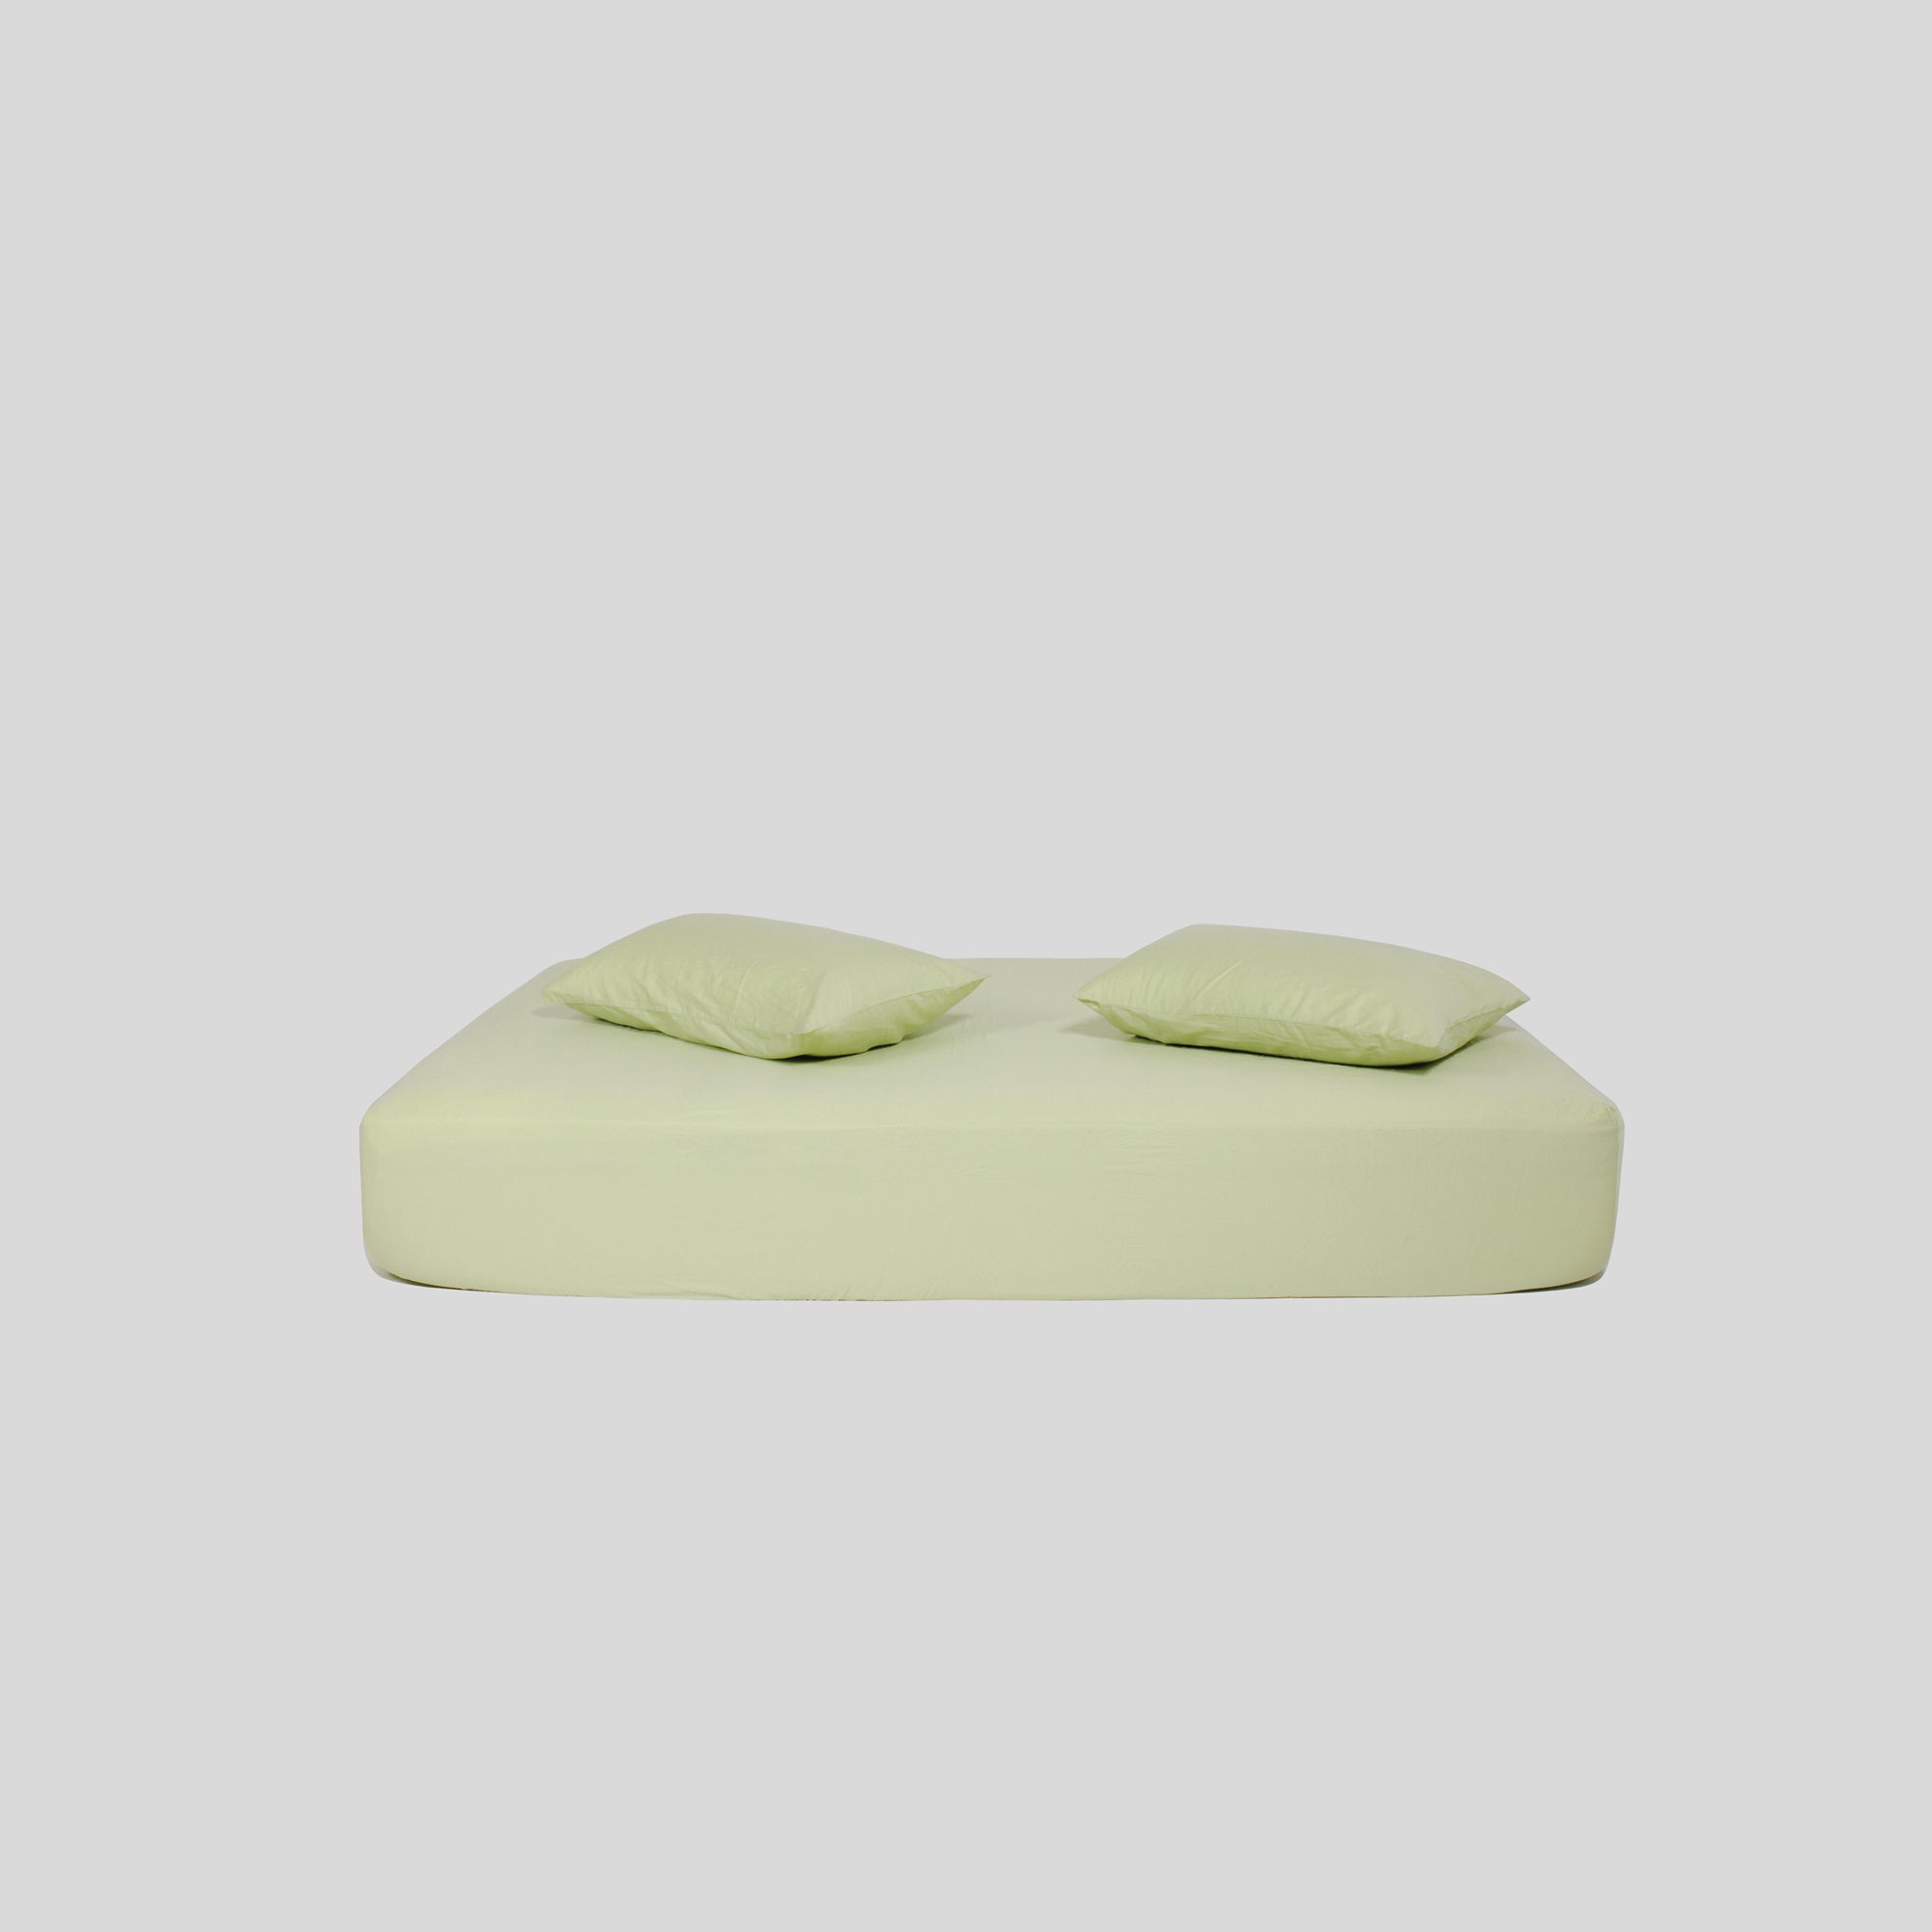 Roomie matcha green organic cotton fitted sheet with two pillows